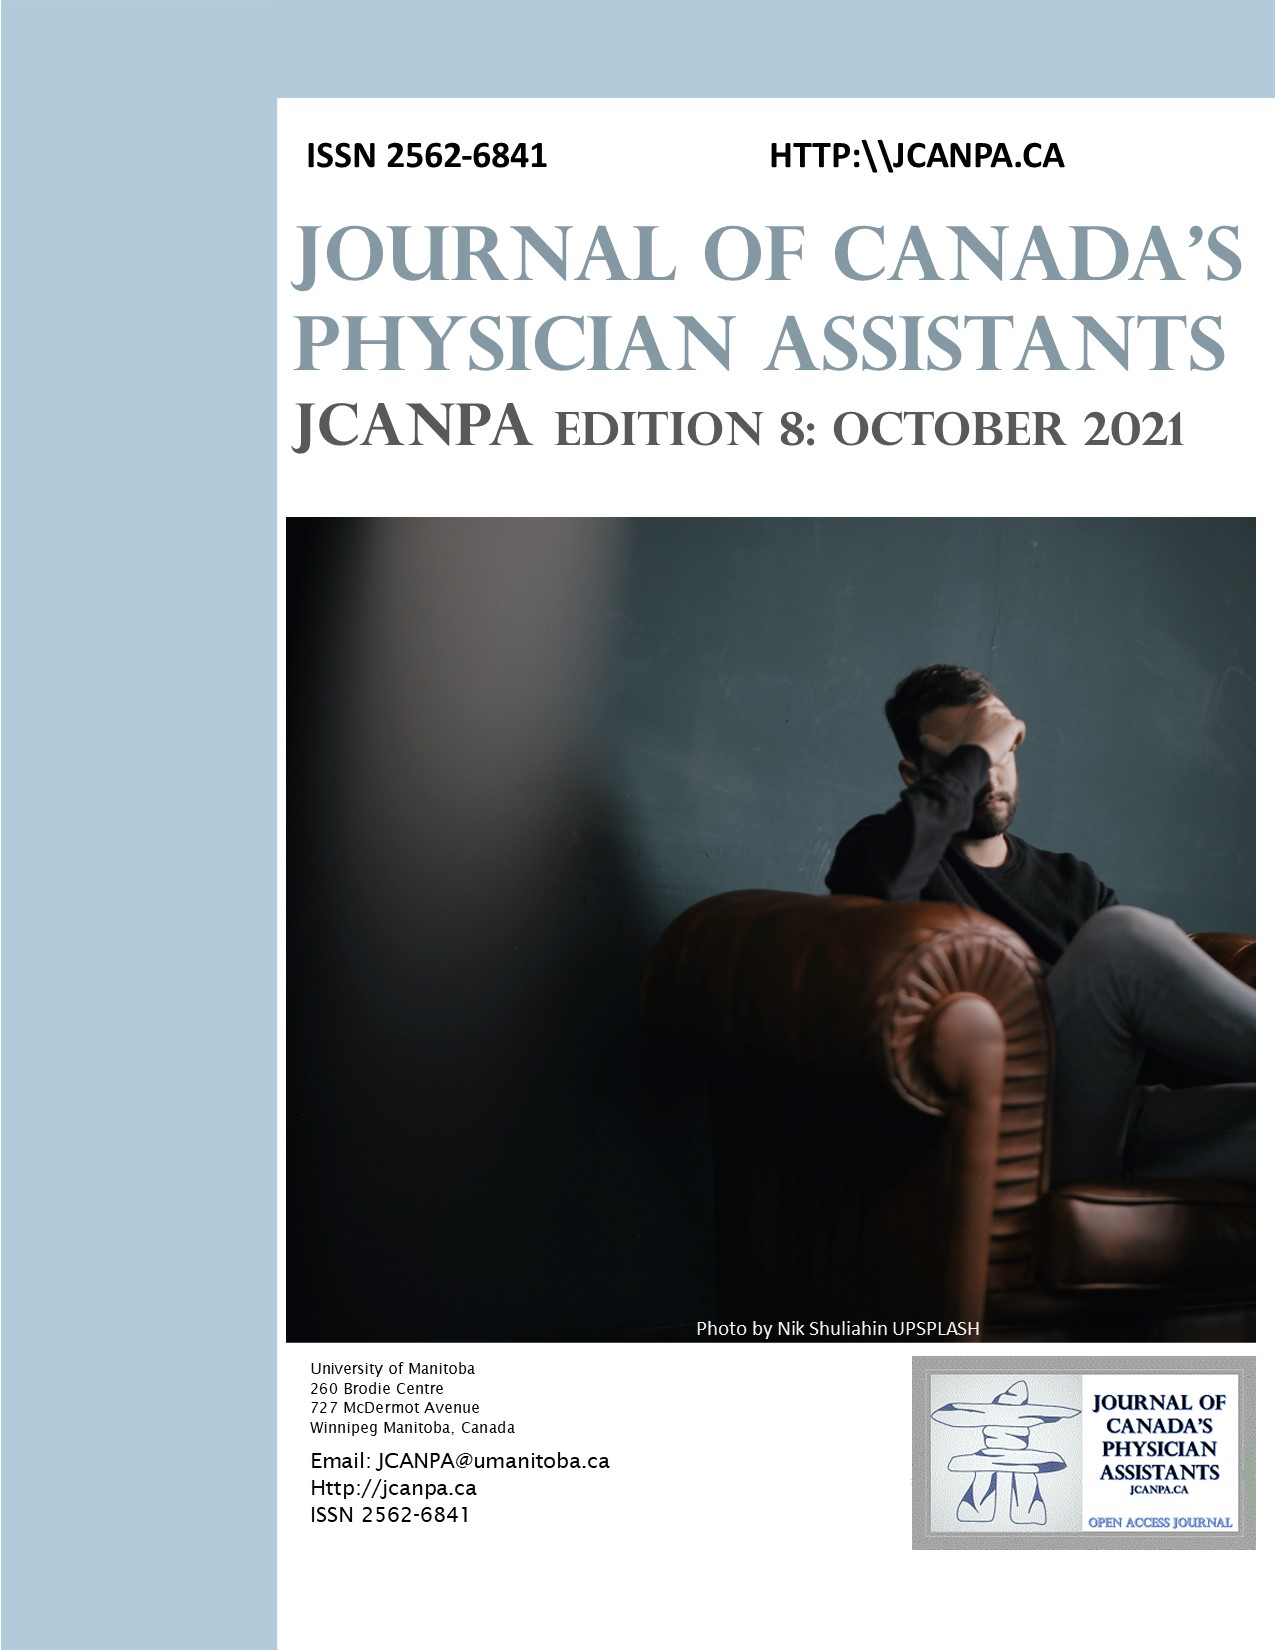 					View Vol. 3 No. 8 (2021): The Journal of Canada's Physician Assistants Number 8 October 2021
				